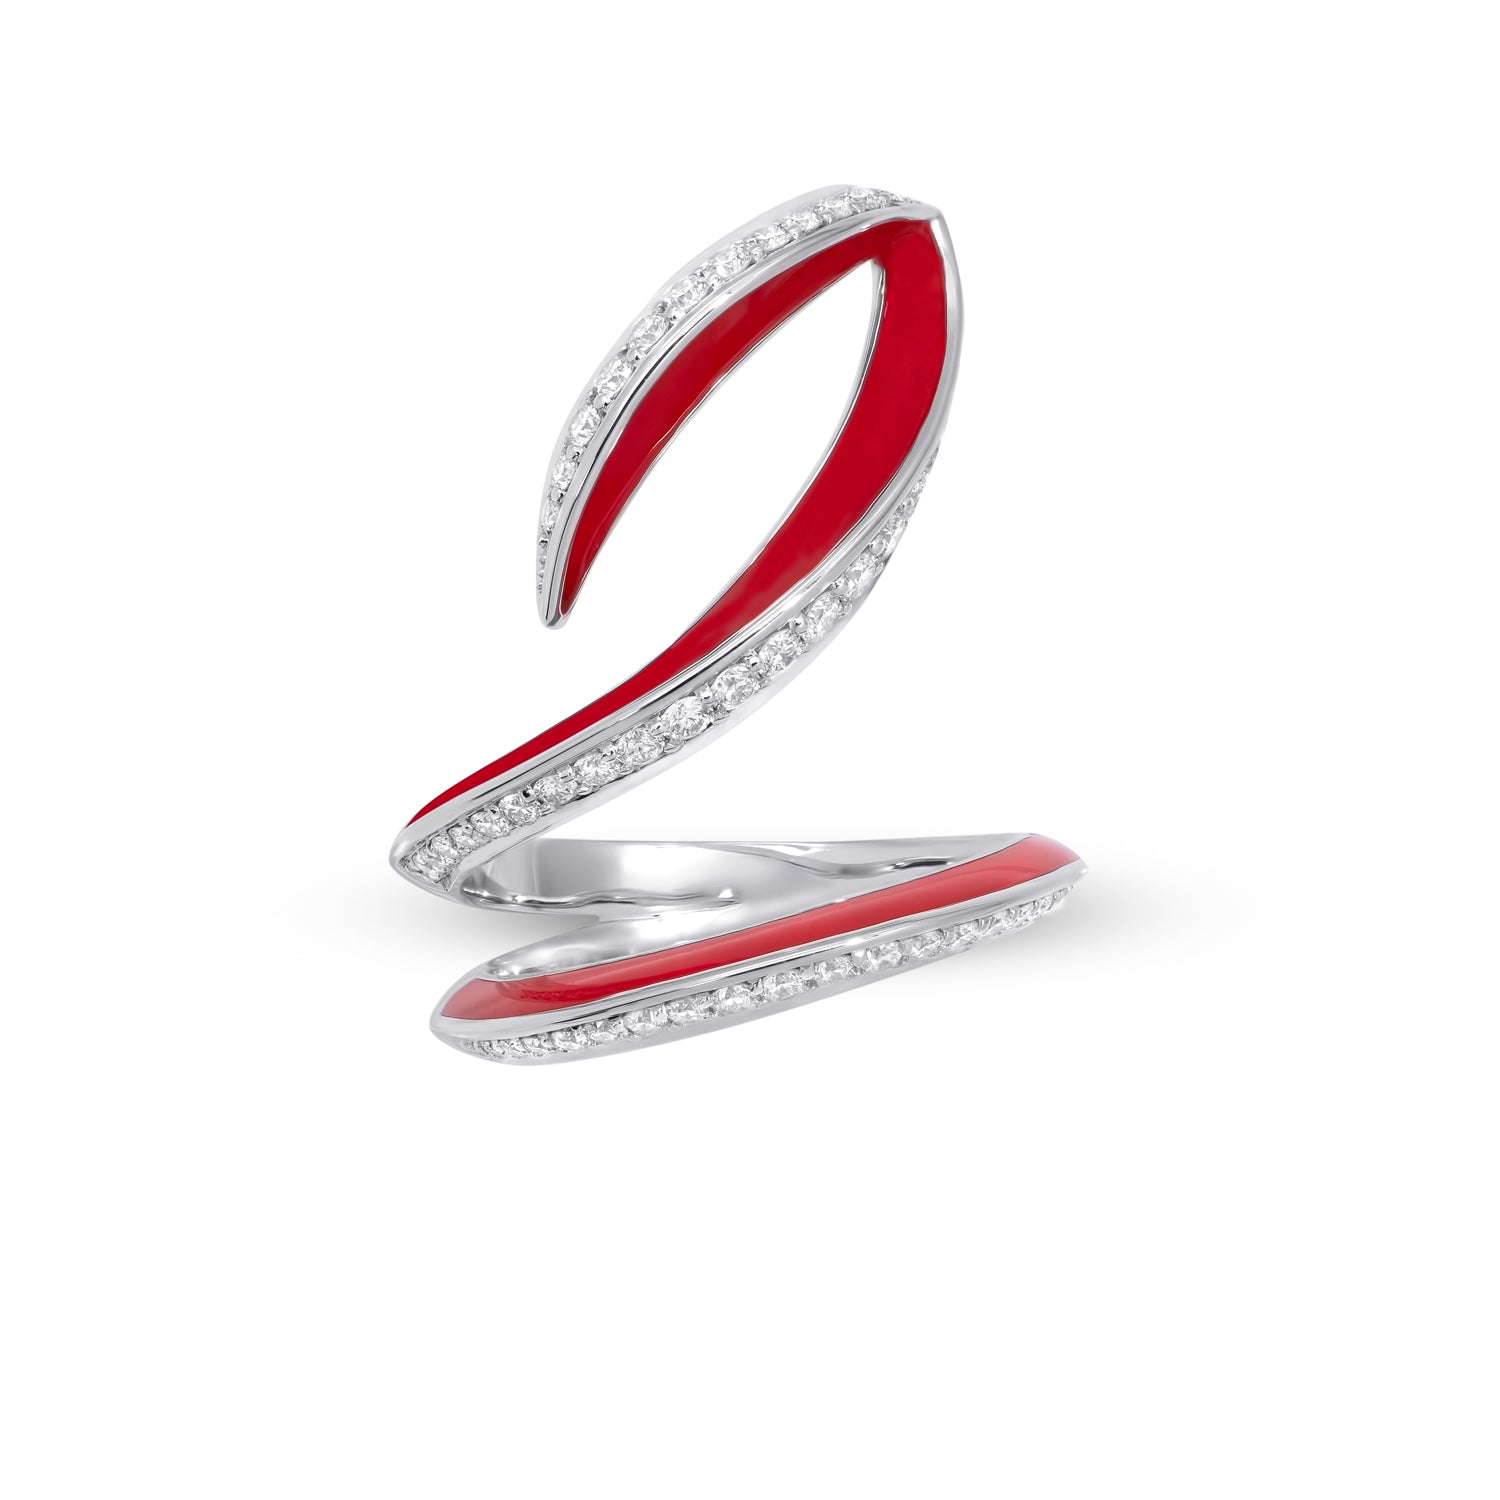 VIVA Curved Ring with Diamonds and Red Enamel